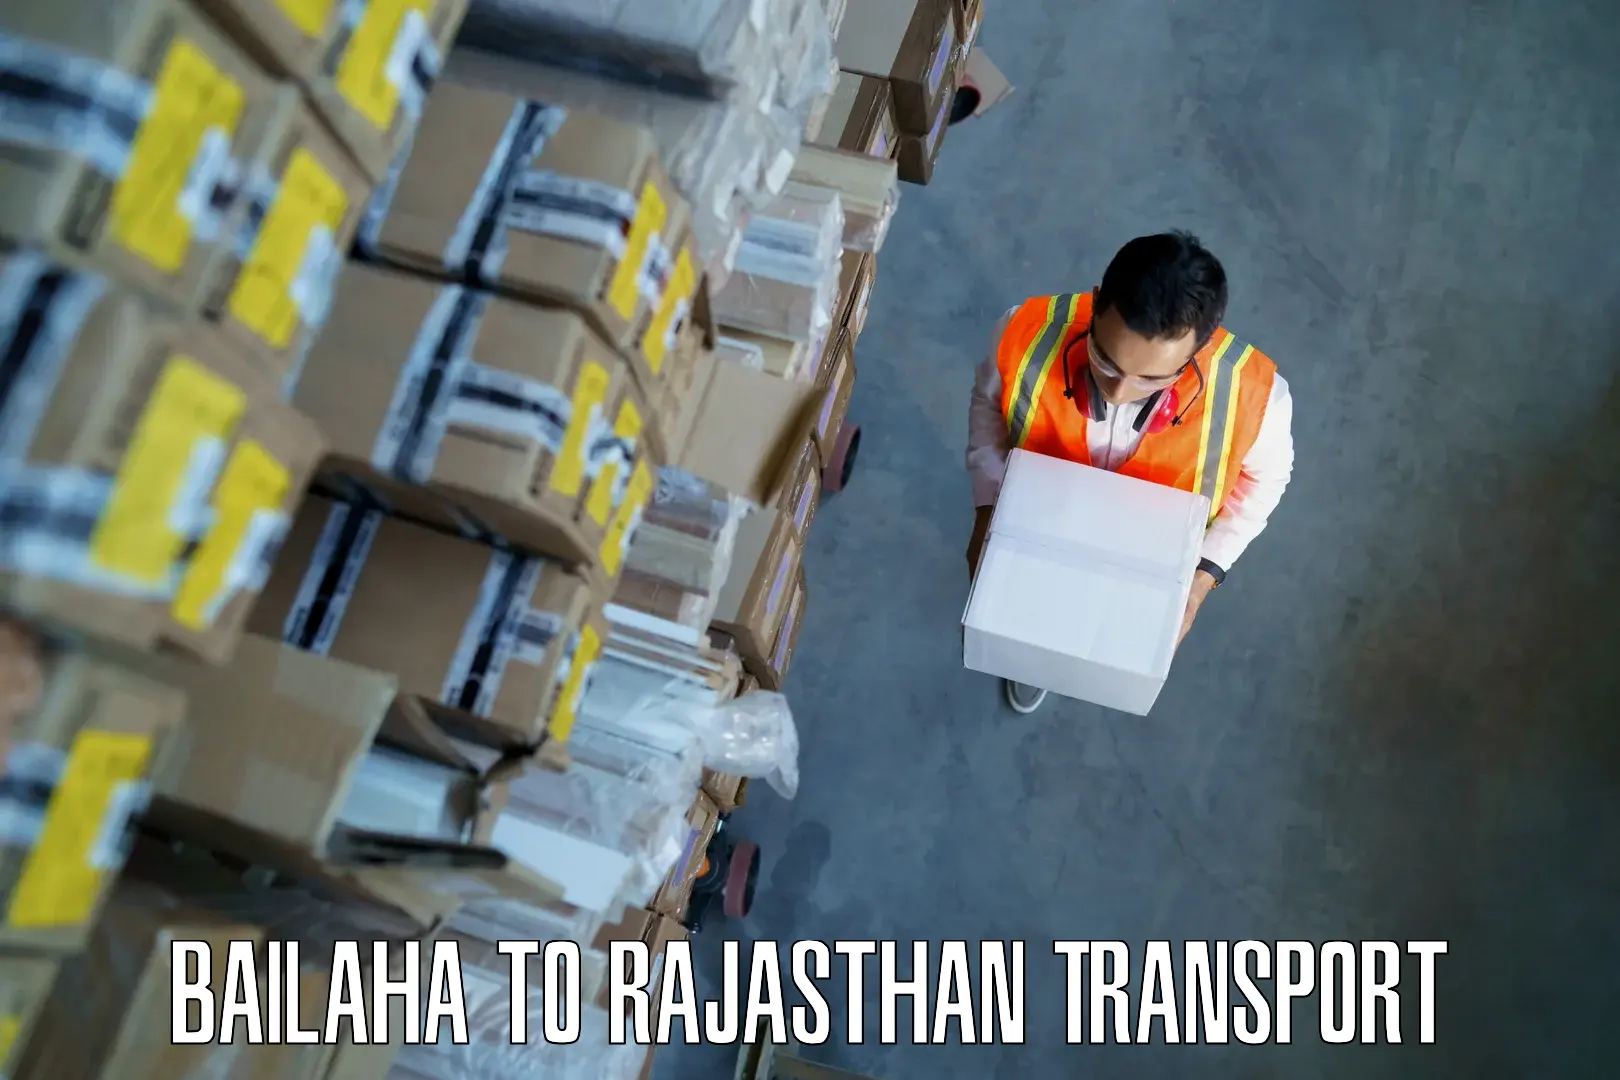 Express transport services Bailaha to Yeswanthapur